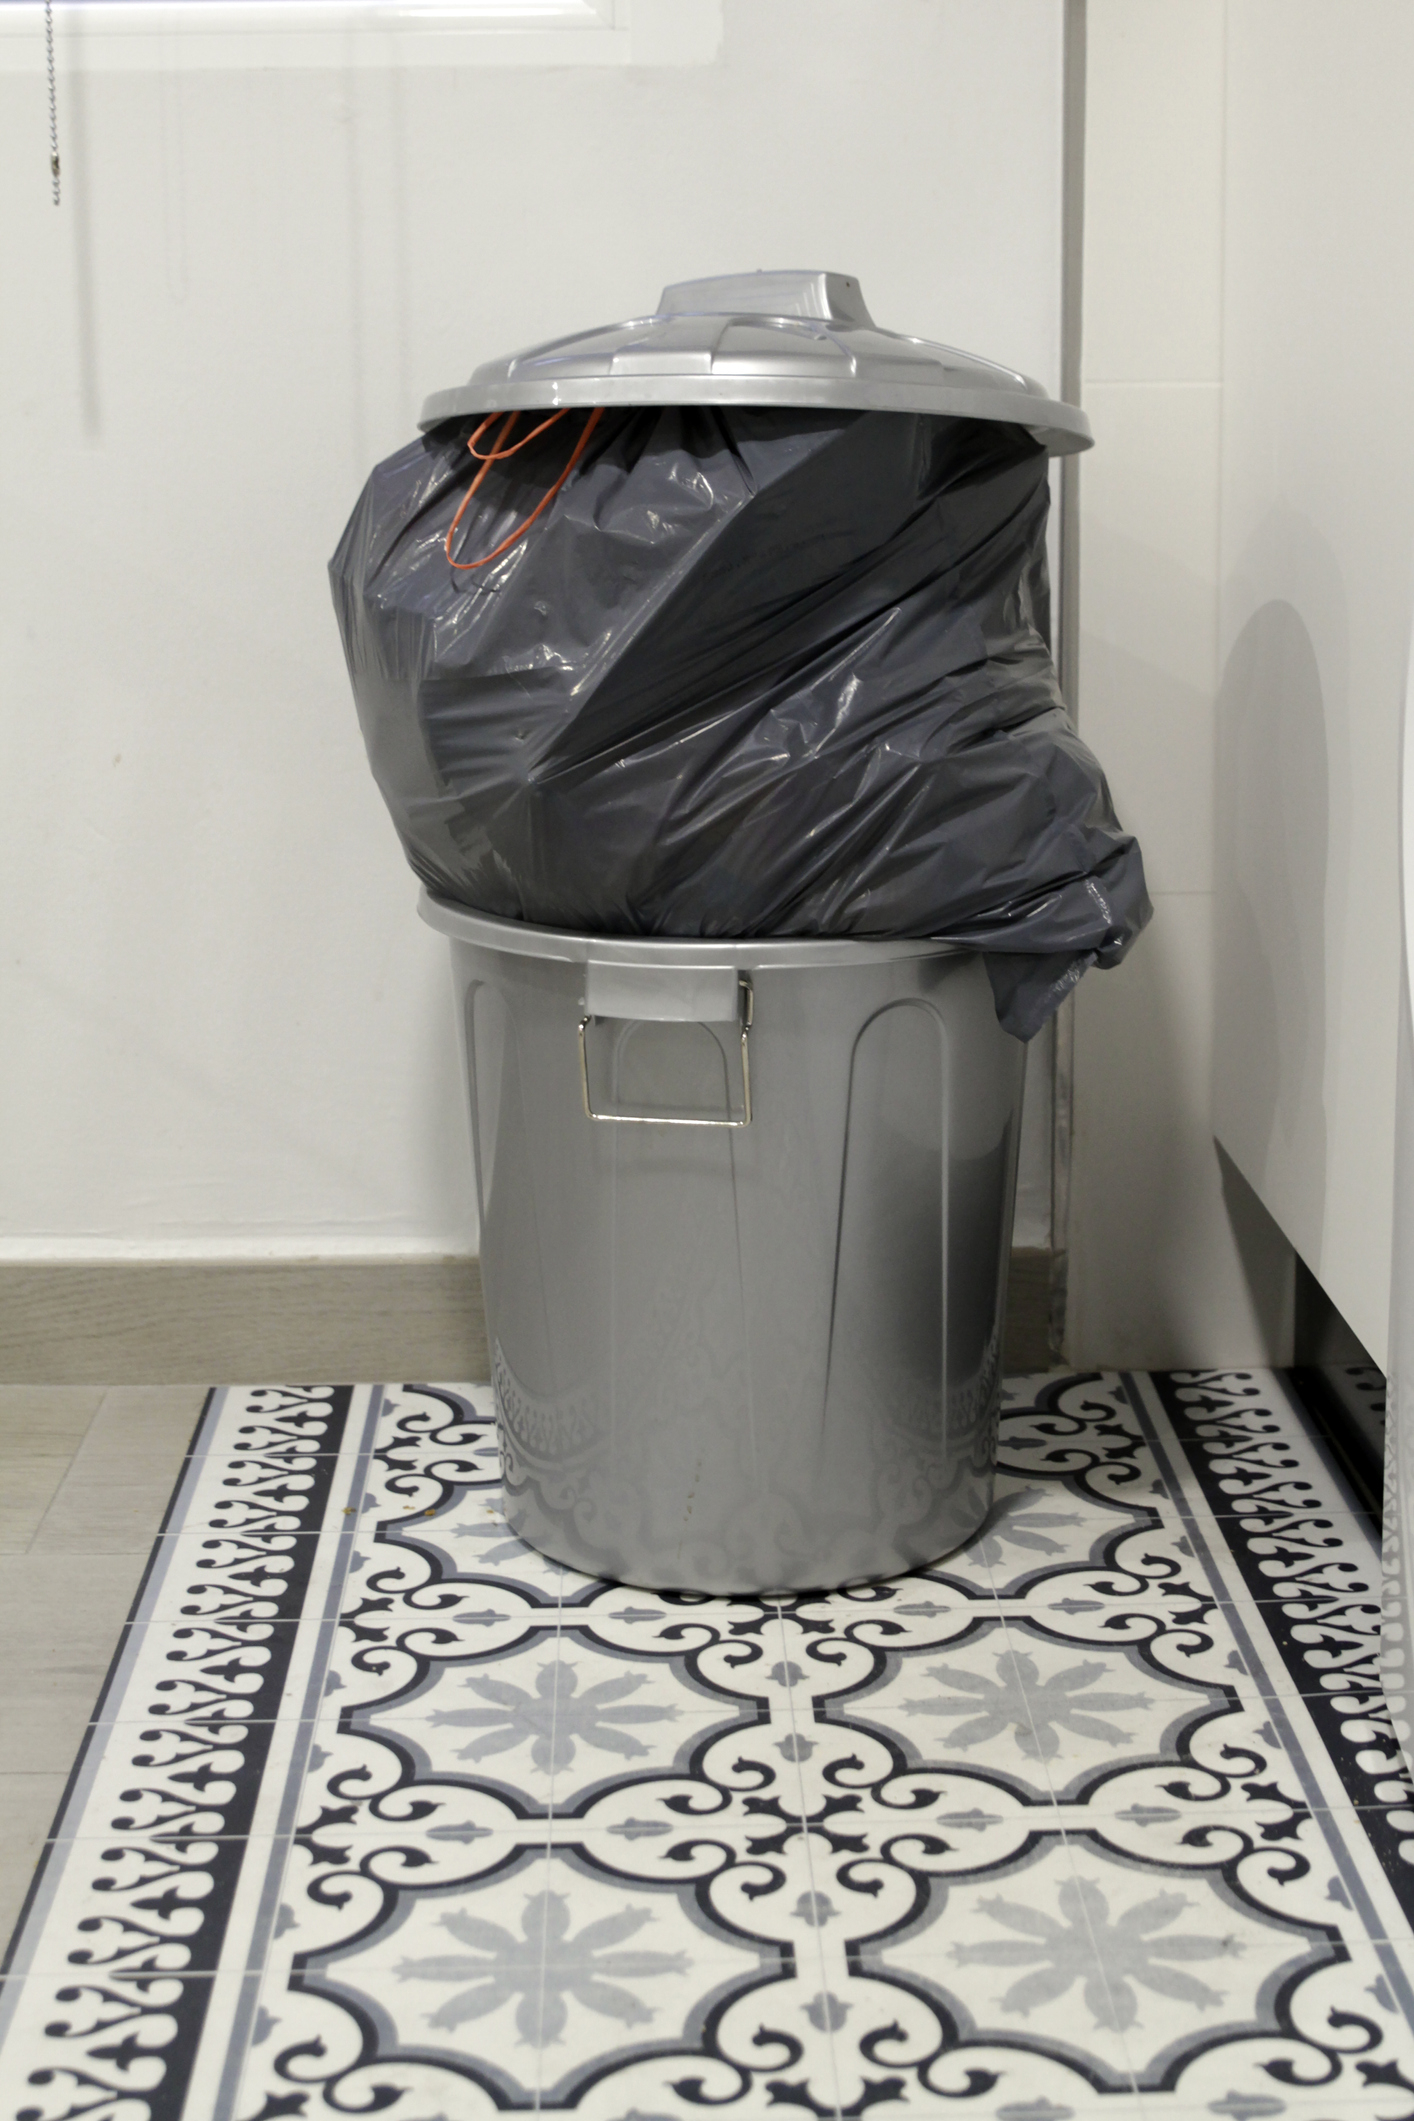 A full trash can with a closed lid and a black bag sticking out in a kitchen